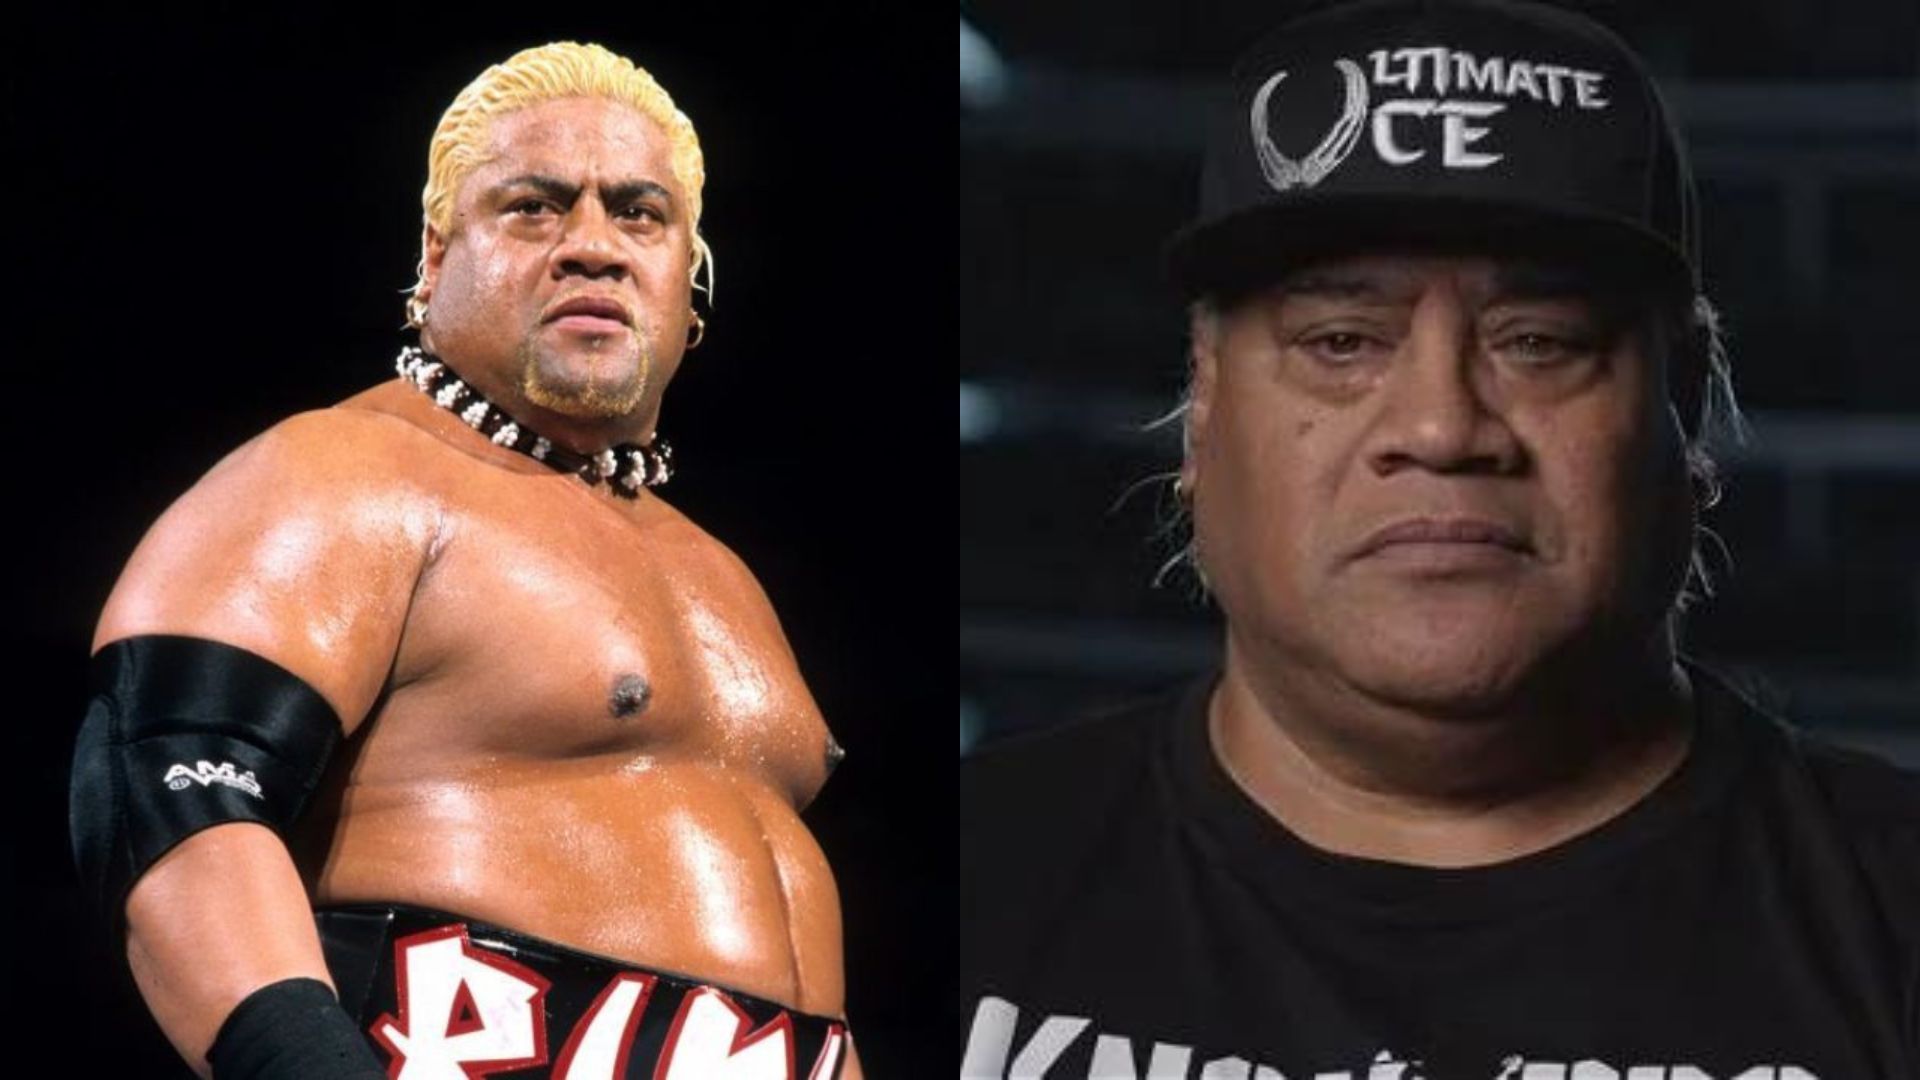 Rikishi is a WWE Hall of Famer and a crucial member of the Anoa